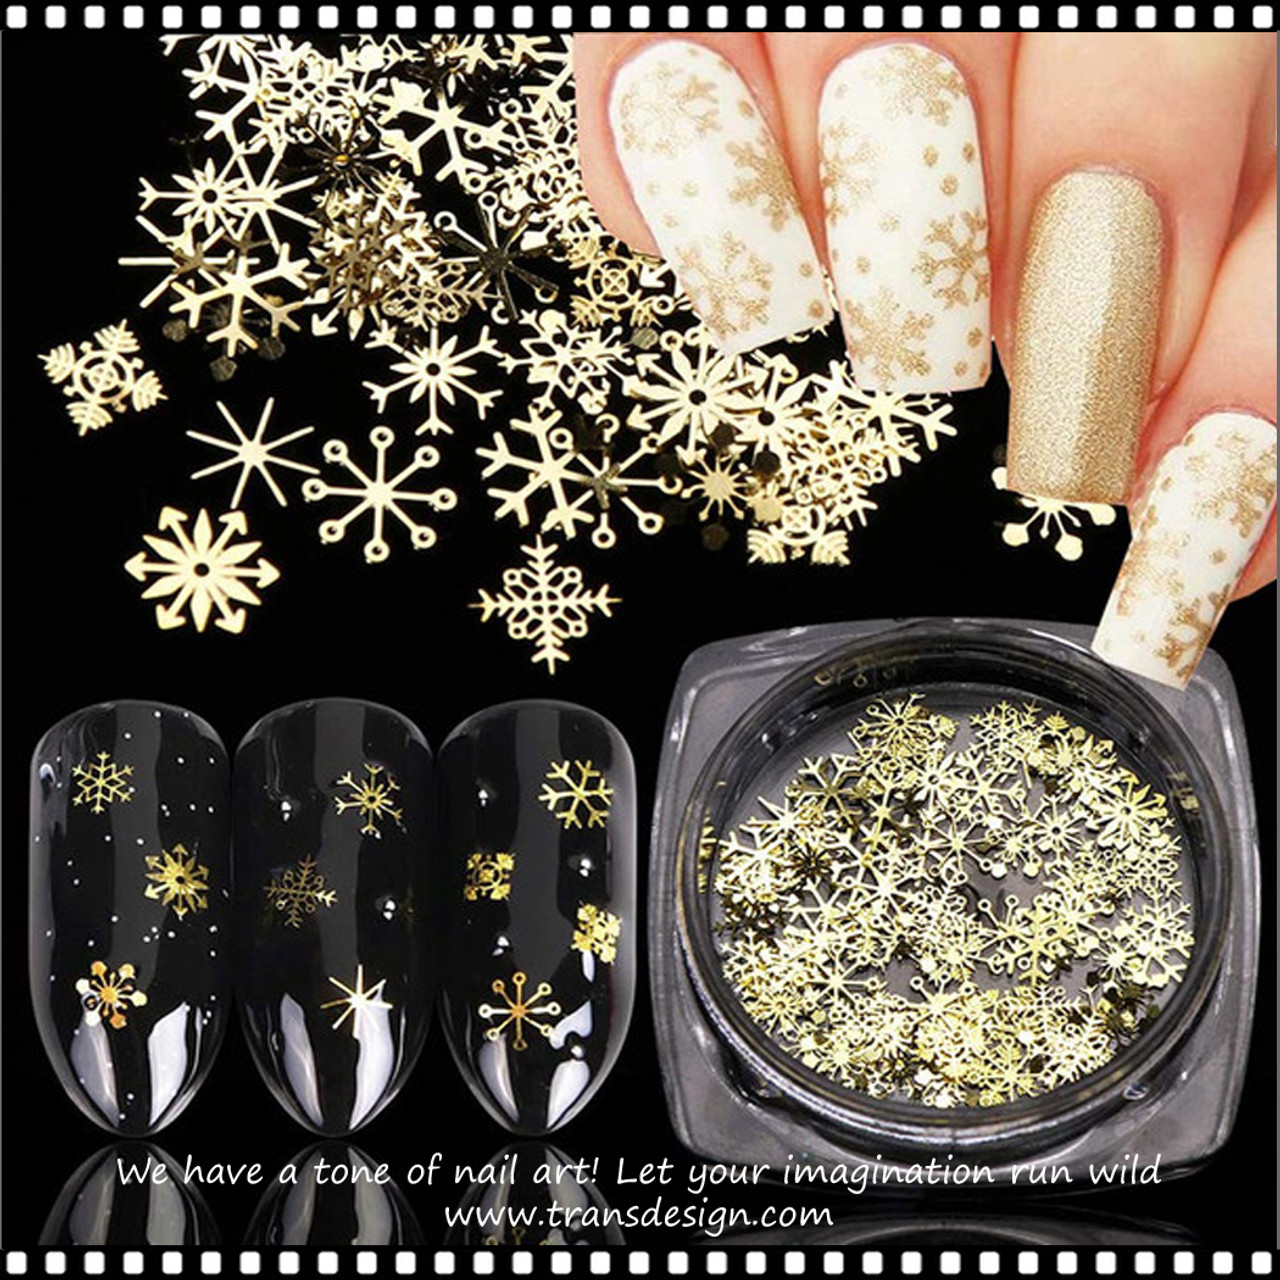 https://cdn11.bigcommerce.com/s-e4af5/images/stencil/1280x1280/products/47199/162932/8048_CHARM_GOLD_Snowflake_Nail_Art_Glitter_Sequin_3D__80646.1696921247.jpg?c=2